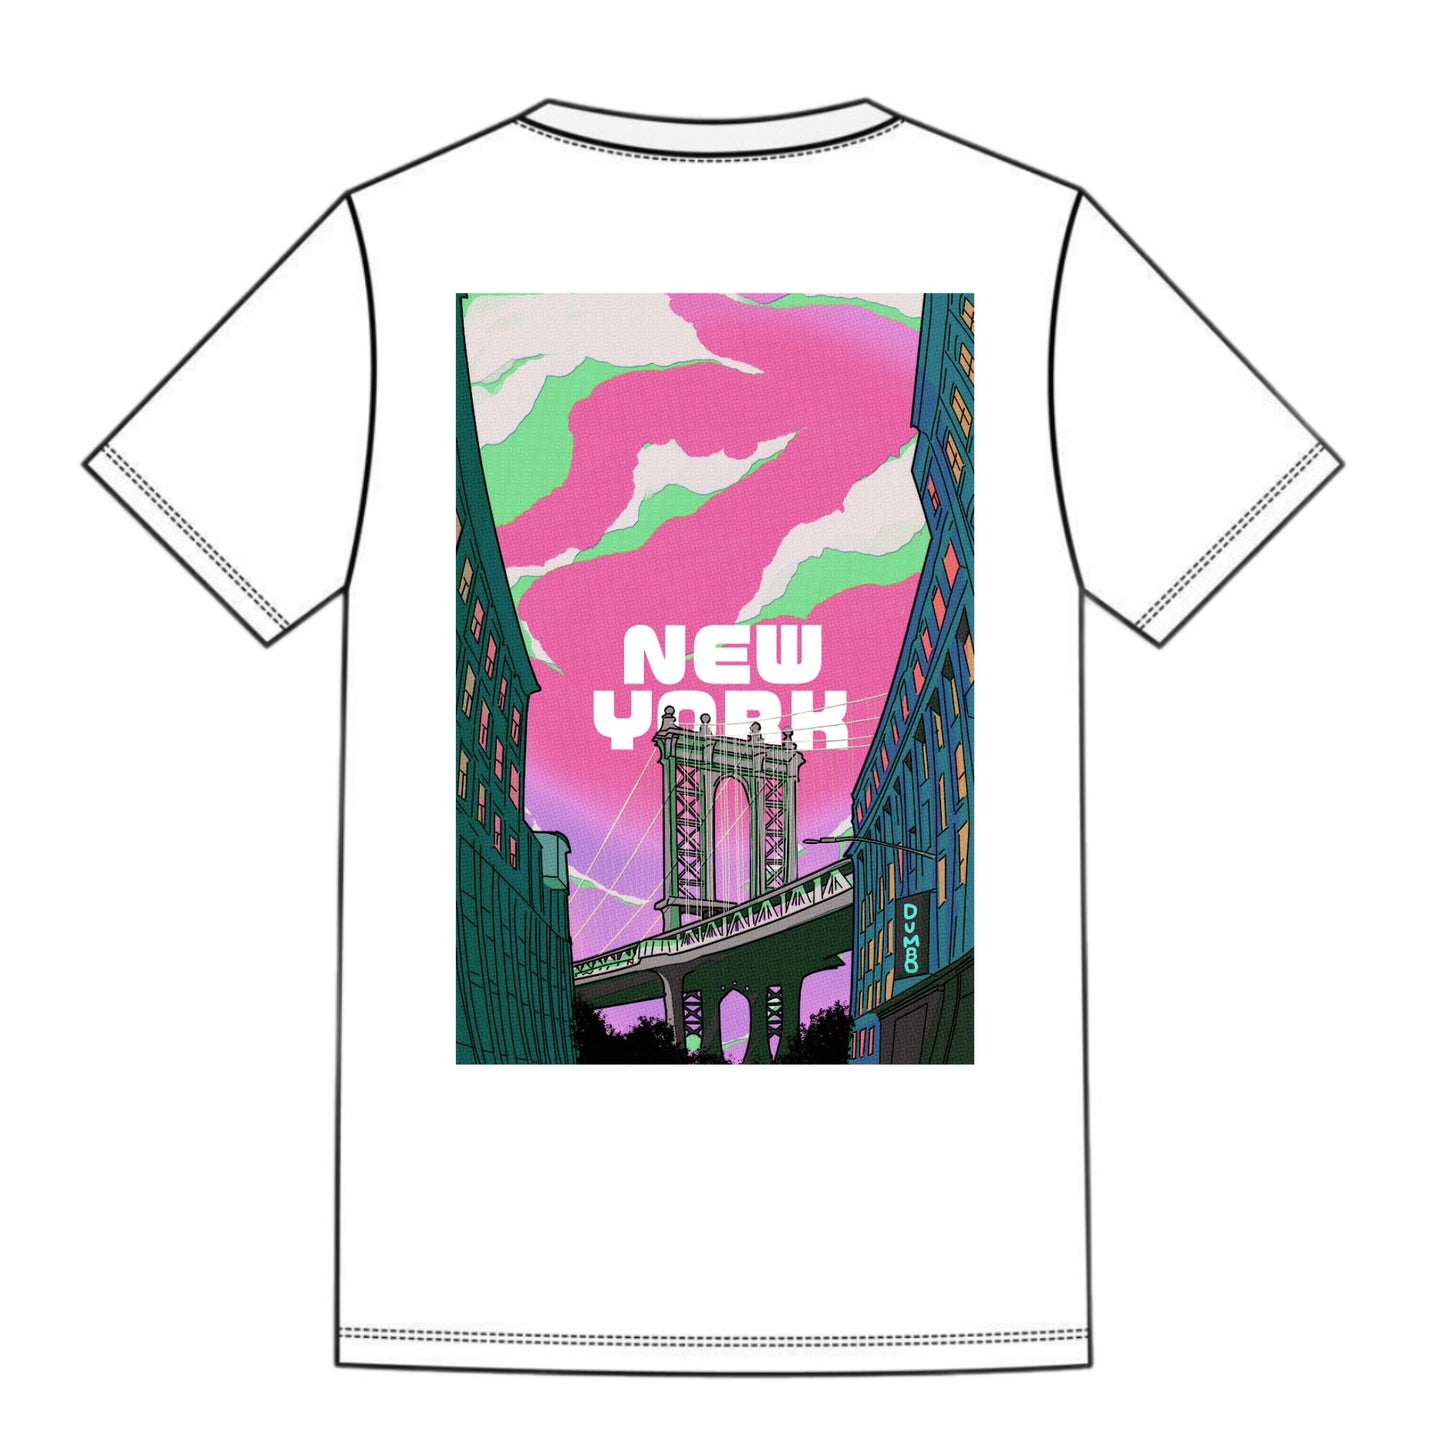 Tokyo Meets New York T-Shirts "Limited Edition"